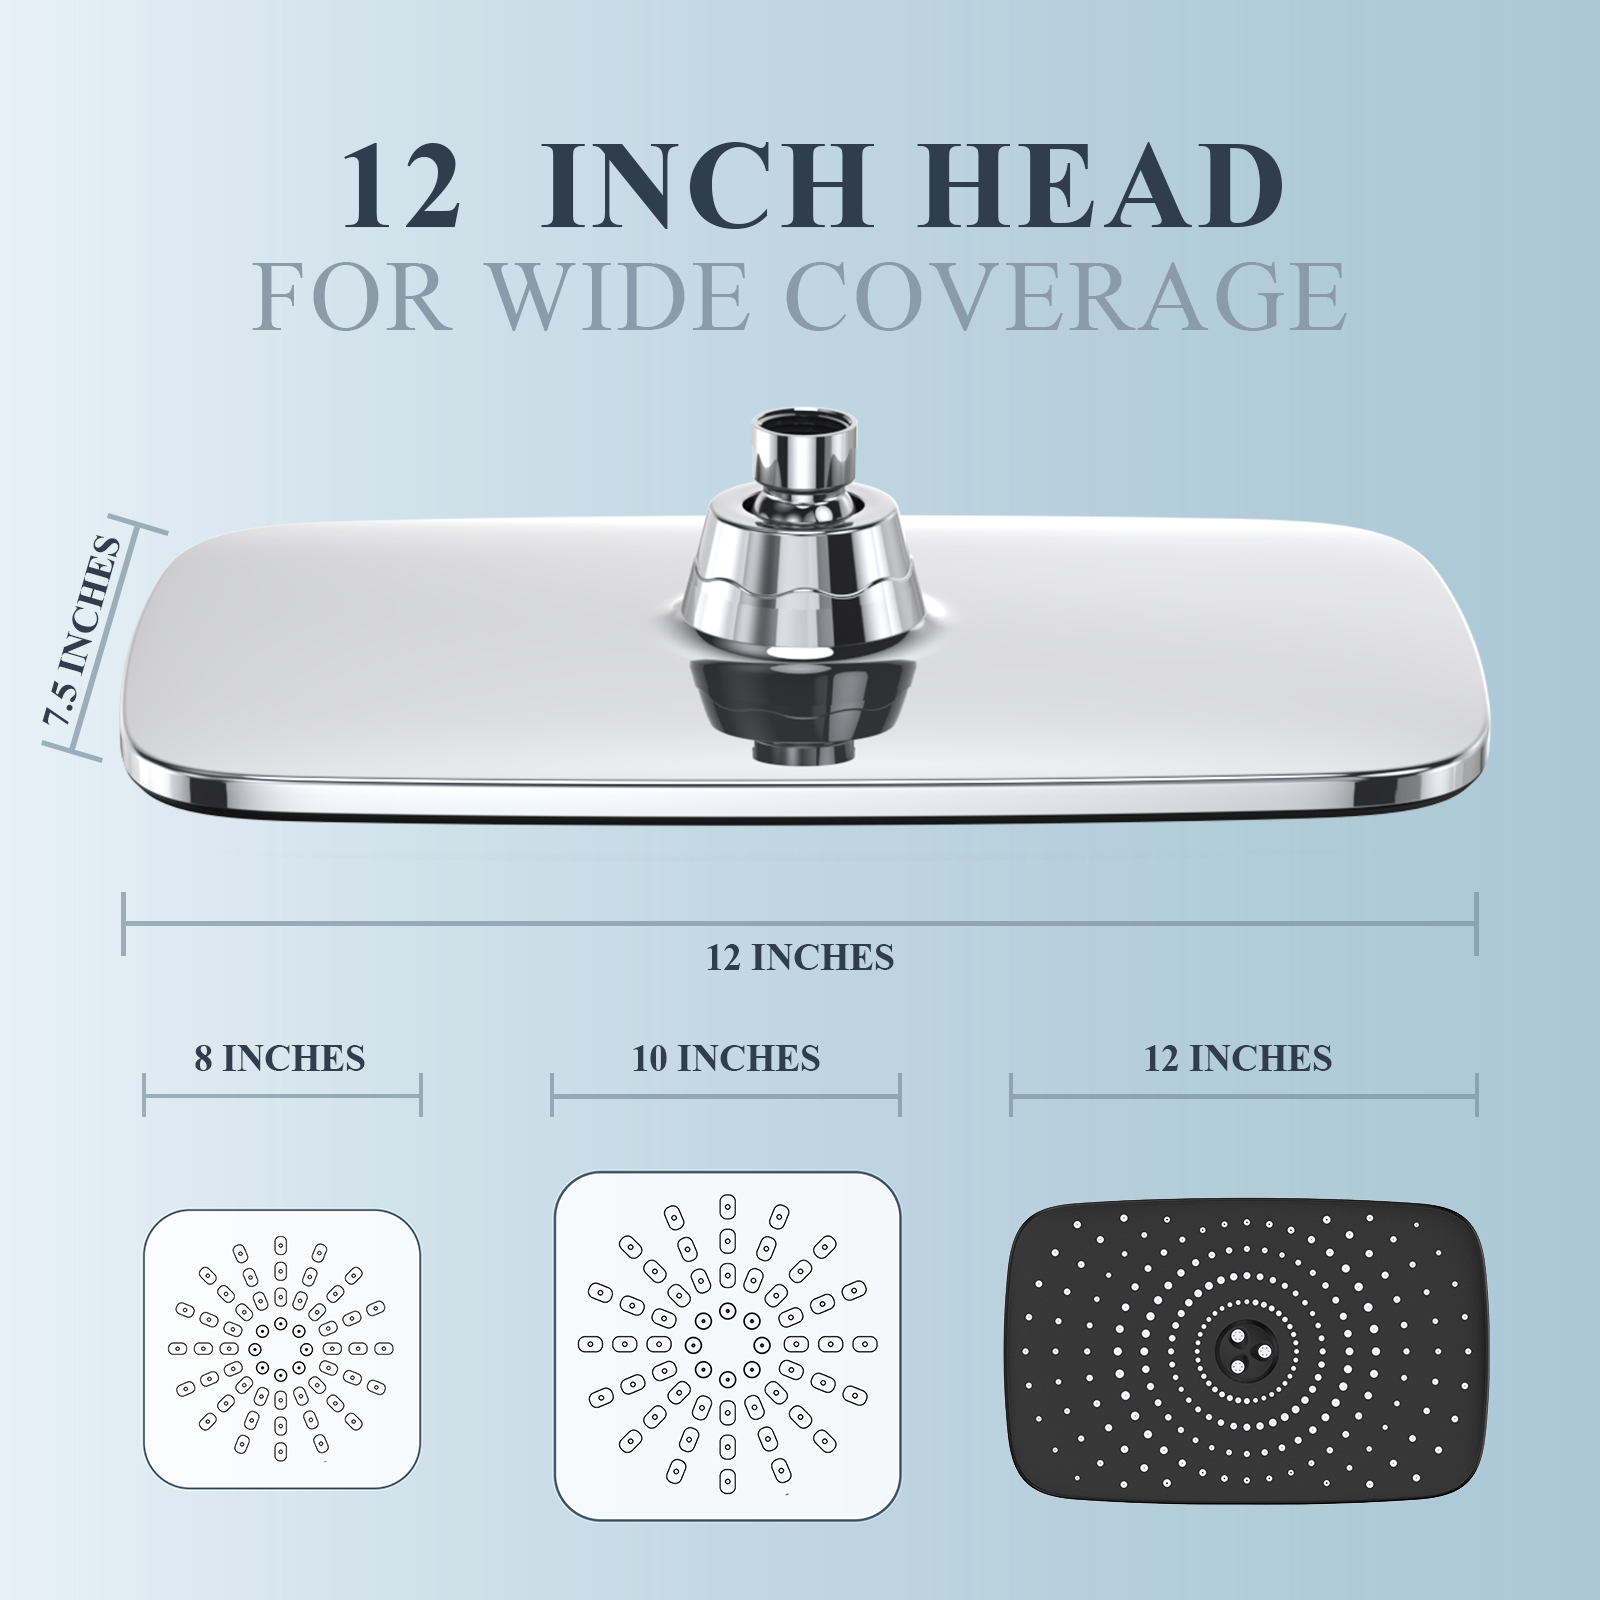 Ophanie 5-Setting High Pressure Shower Head, 12 inch Rain Shower Head with Handheld and Hose, Chrome - image 5 of 9